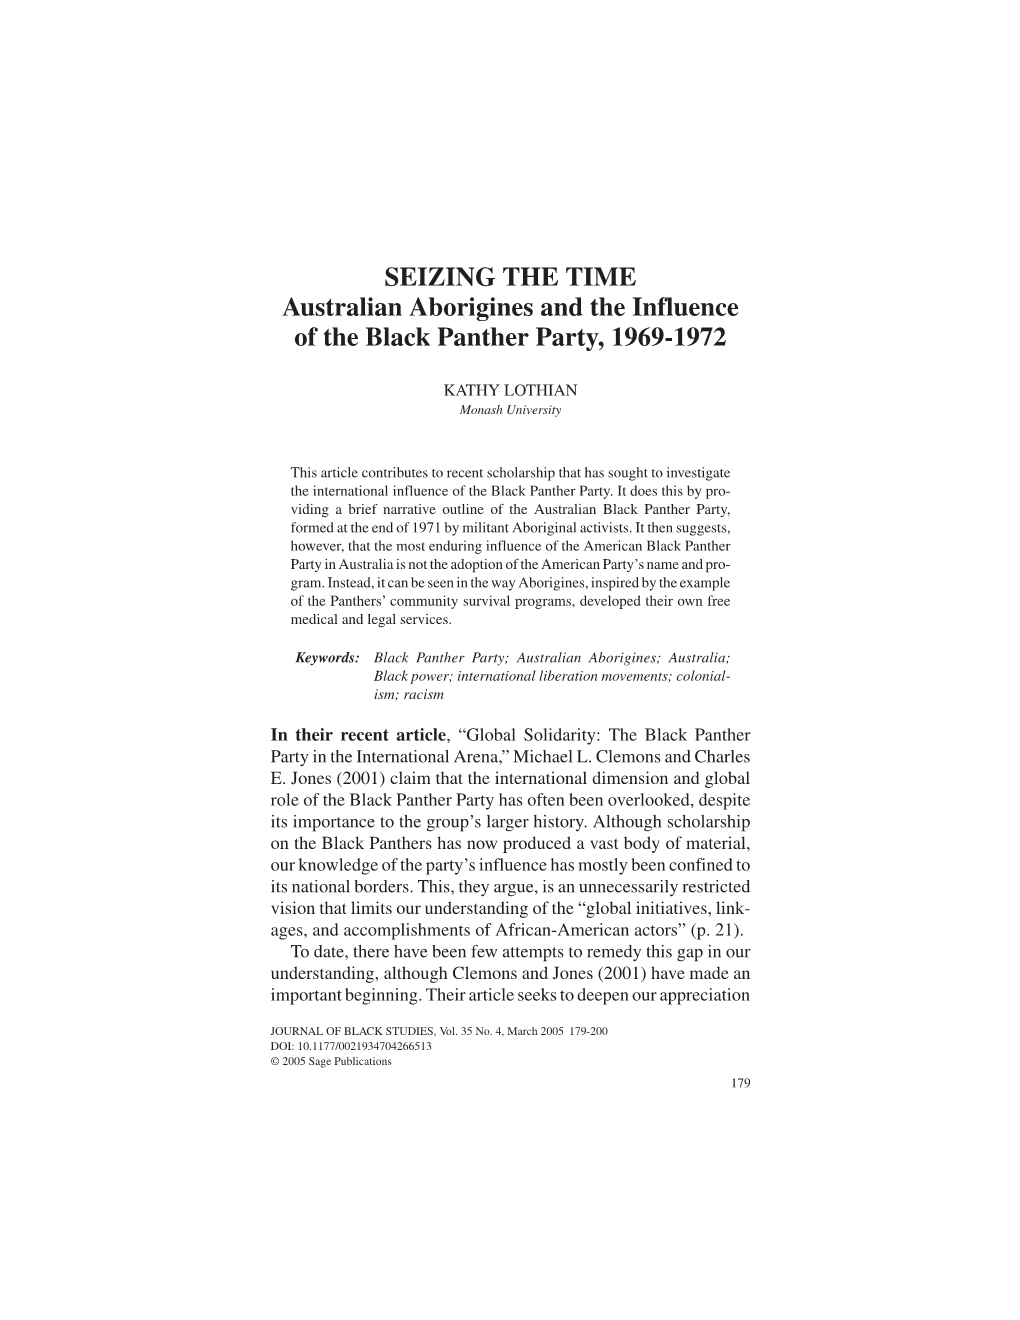 SEIZING the TIME Australian Aborigines and the Influence of the Black Panther Party, 1969-1972